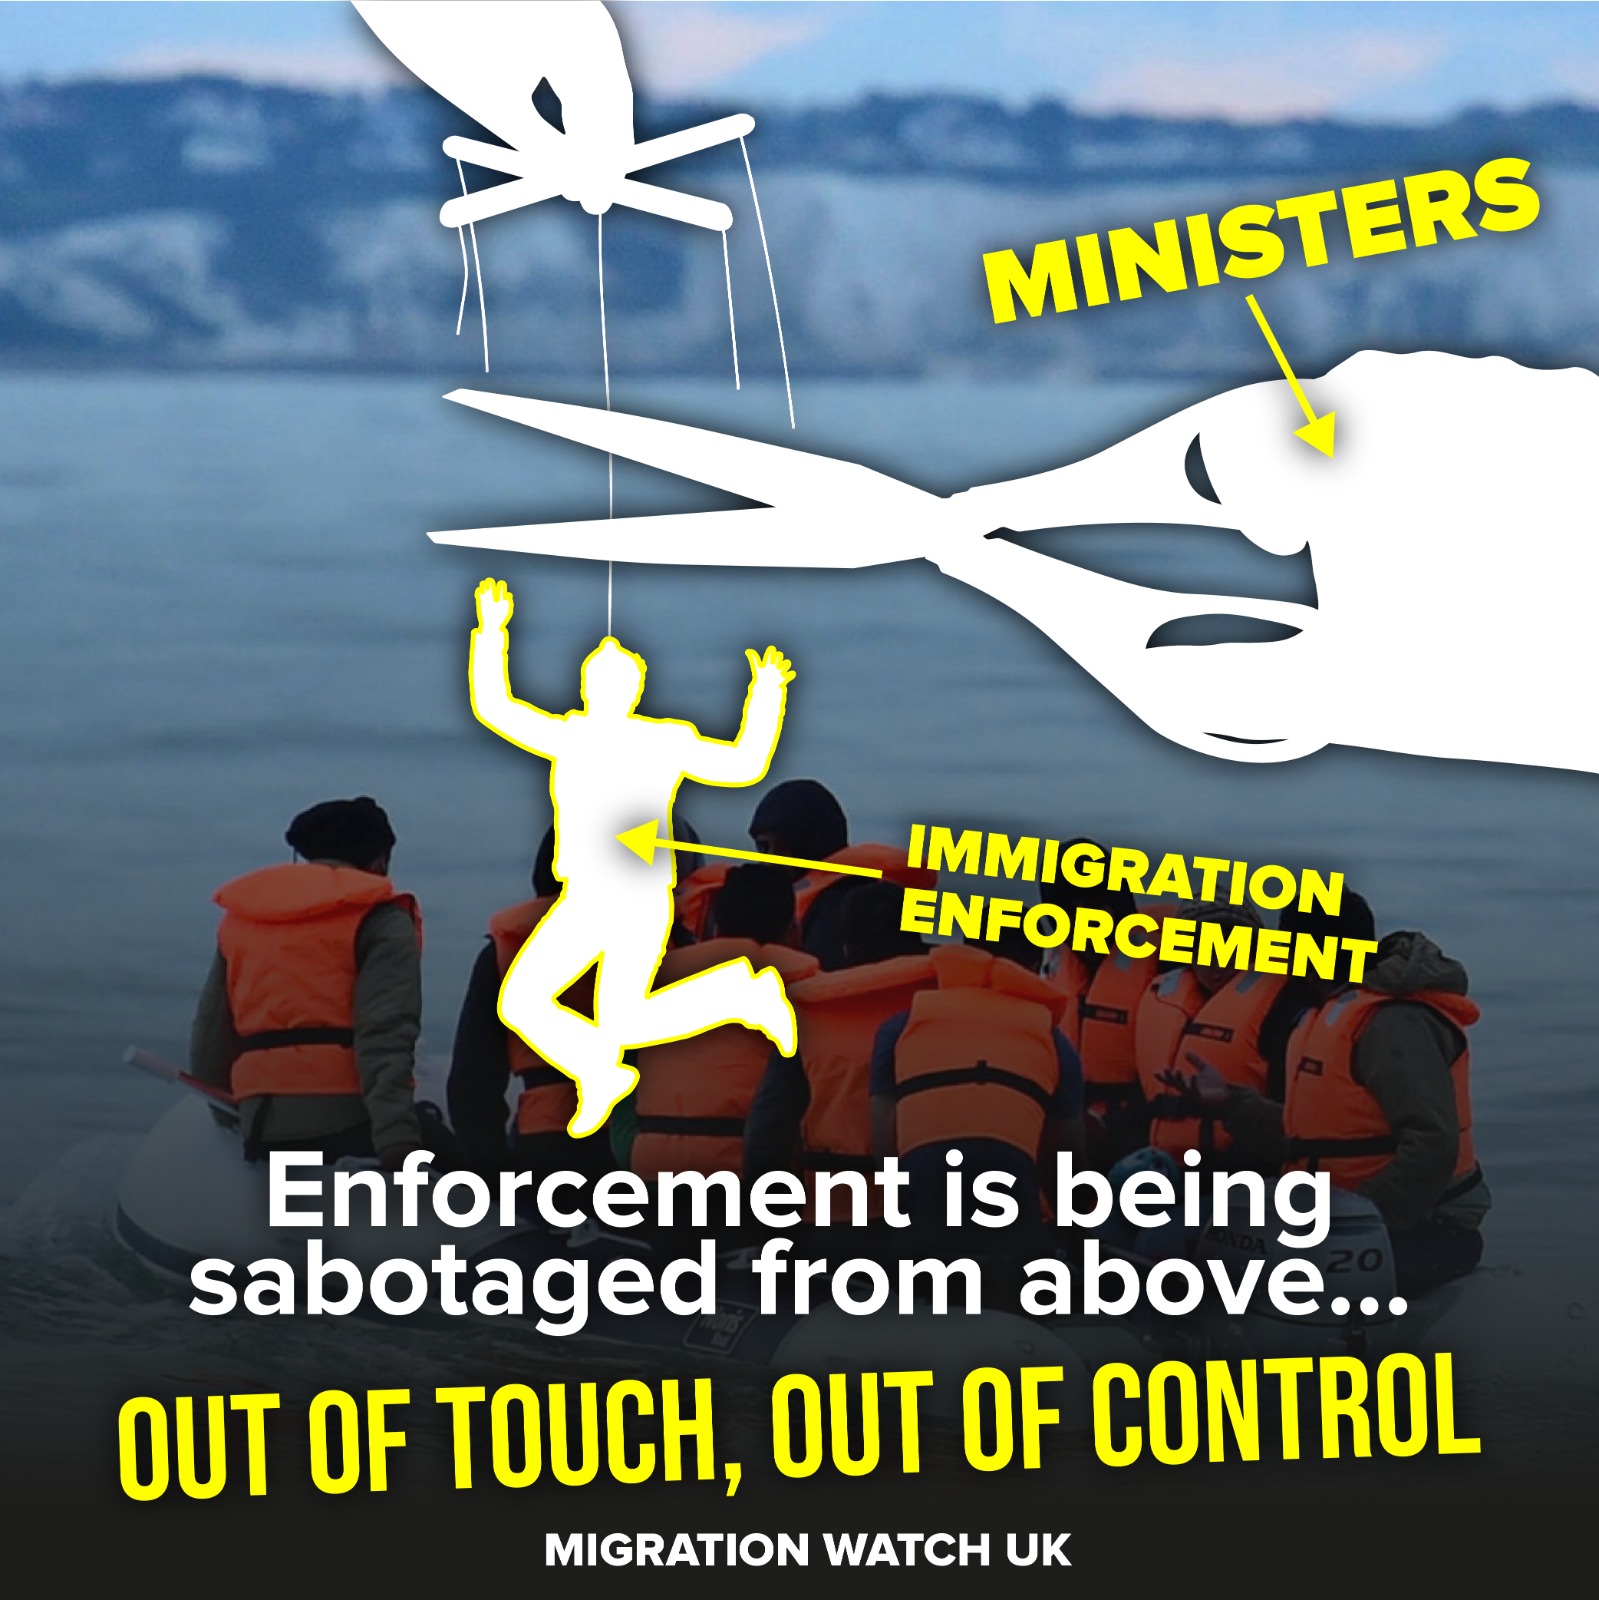 illegal-arrivals-shot-up-so-government-cut-enforcement-staff-while-funneling-your-money-towards-re-education-sessions